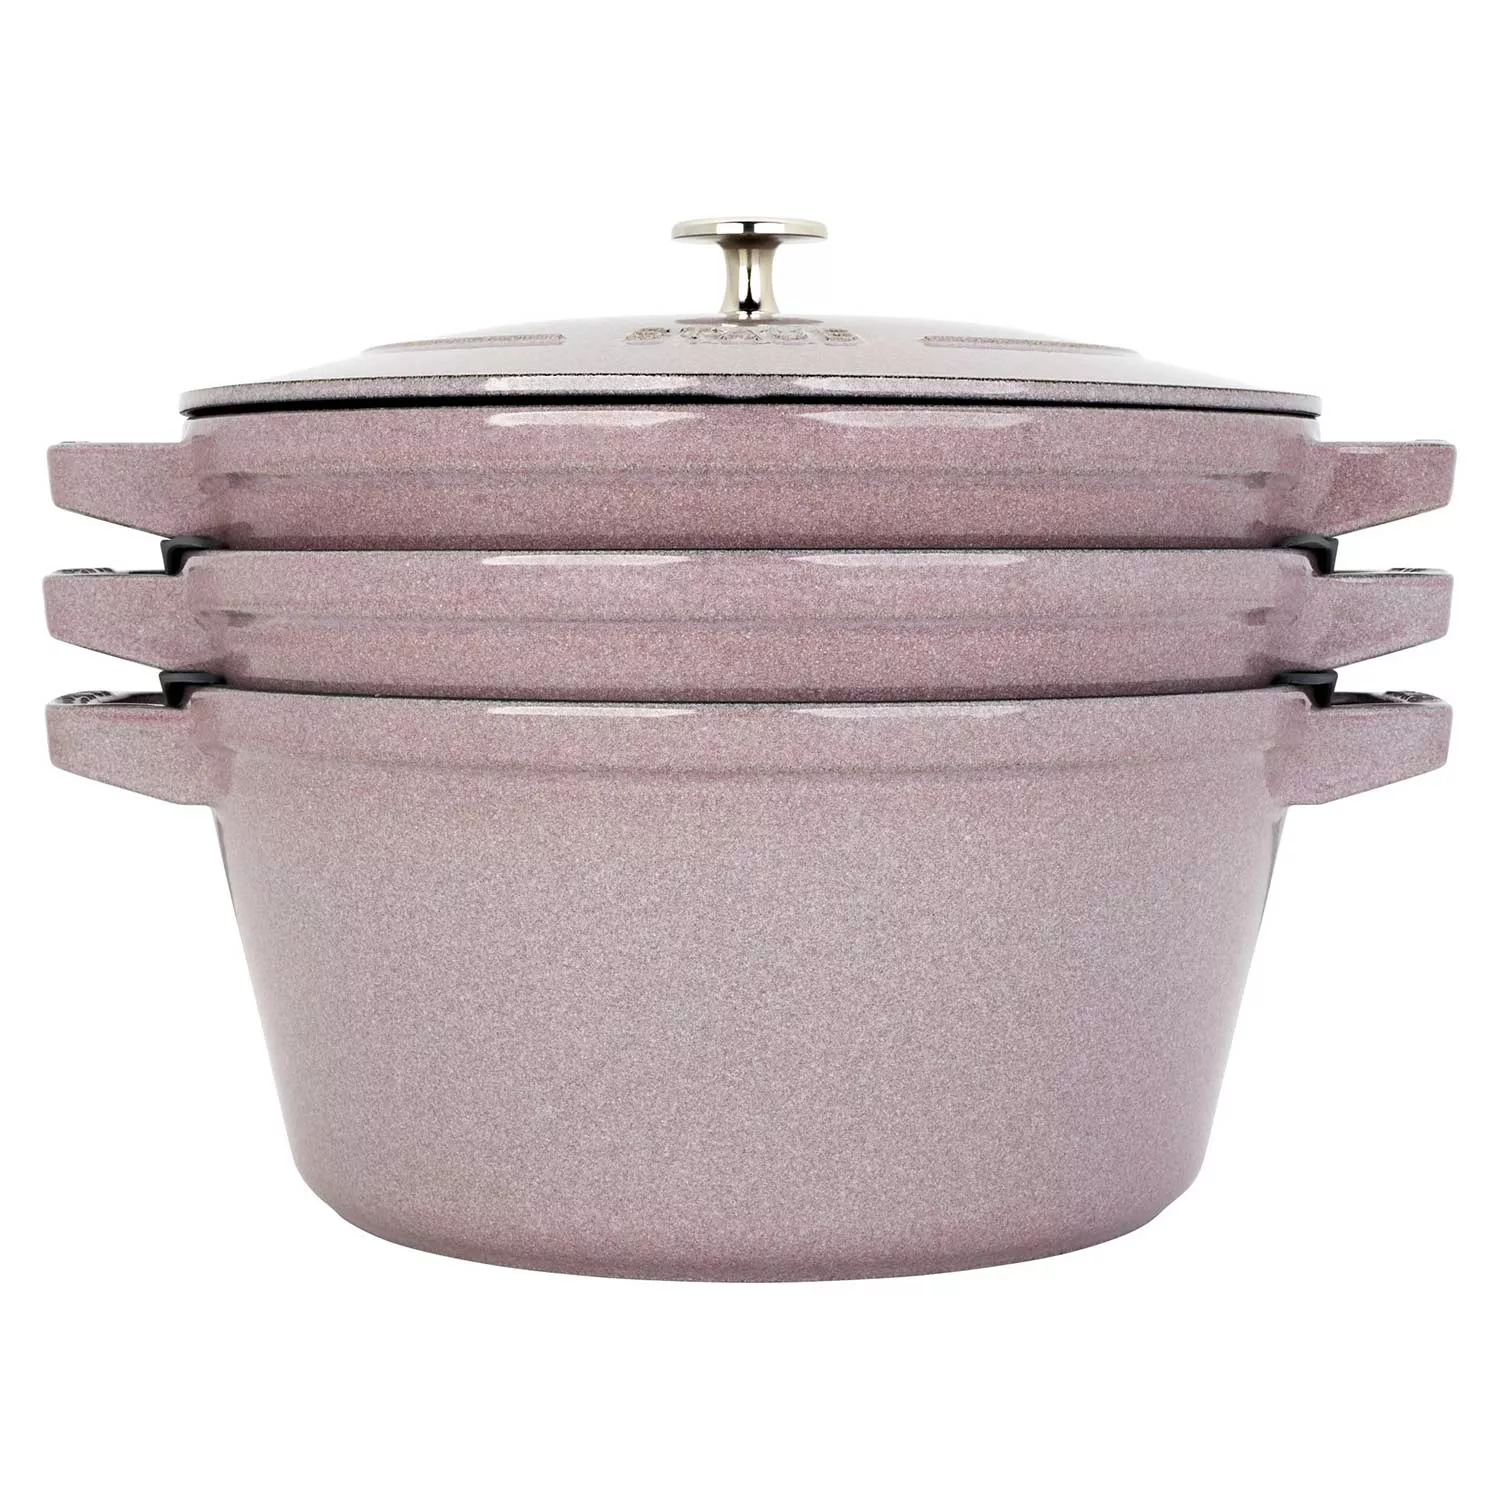 2-in-1 Enameled Cast Iron Cocotte Double Braiser Pan with Grill Lid 3.3  Quarts - Barbecue 